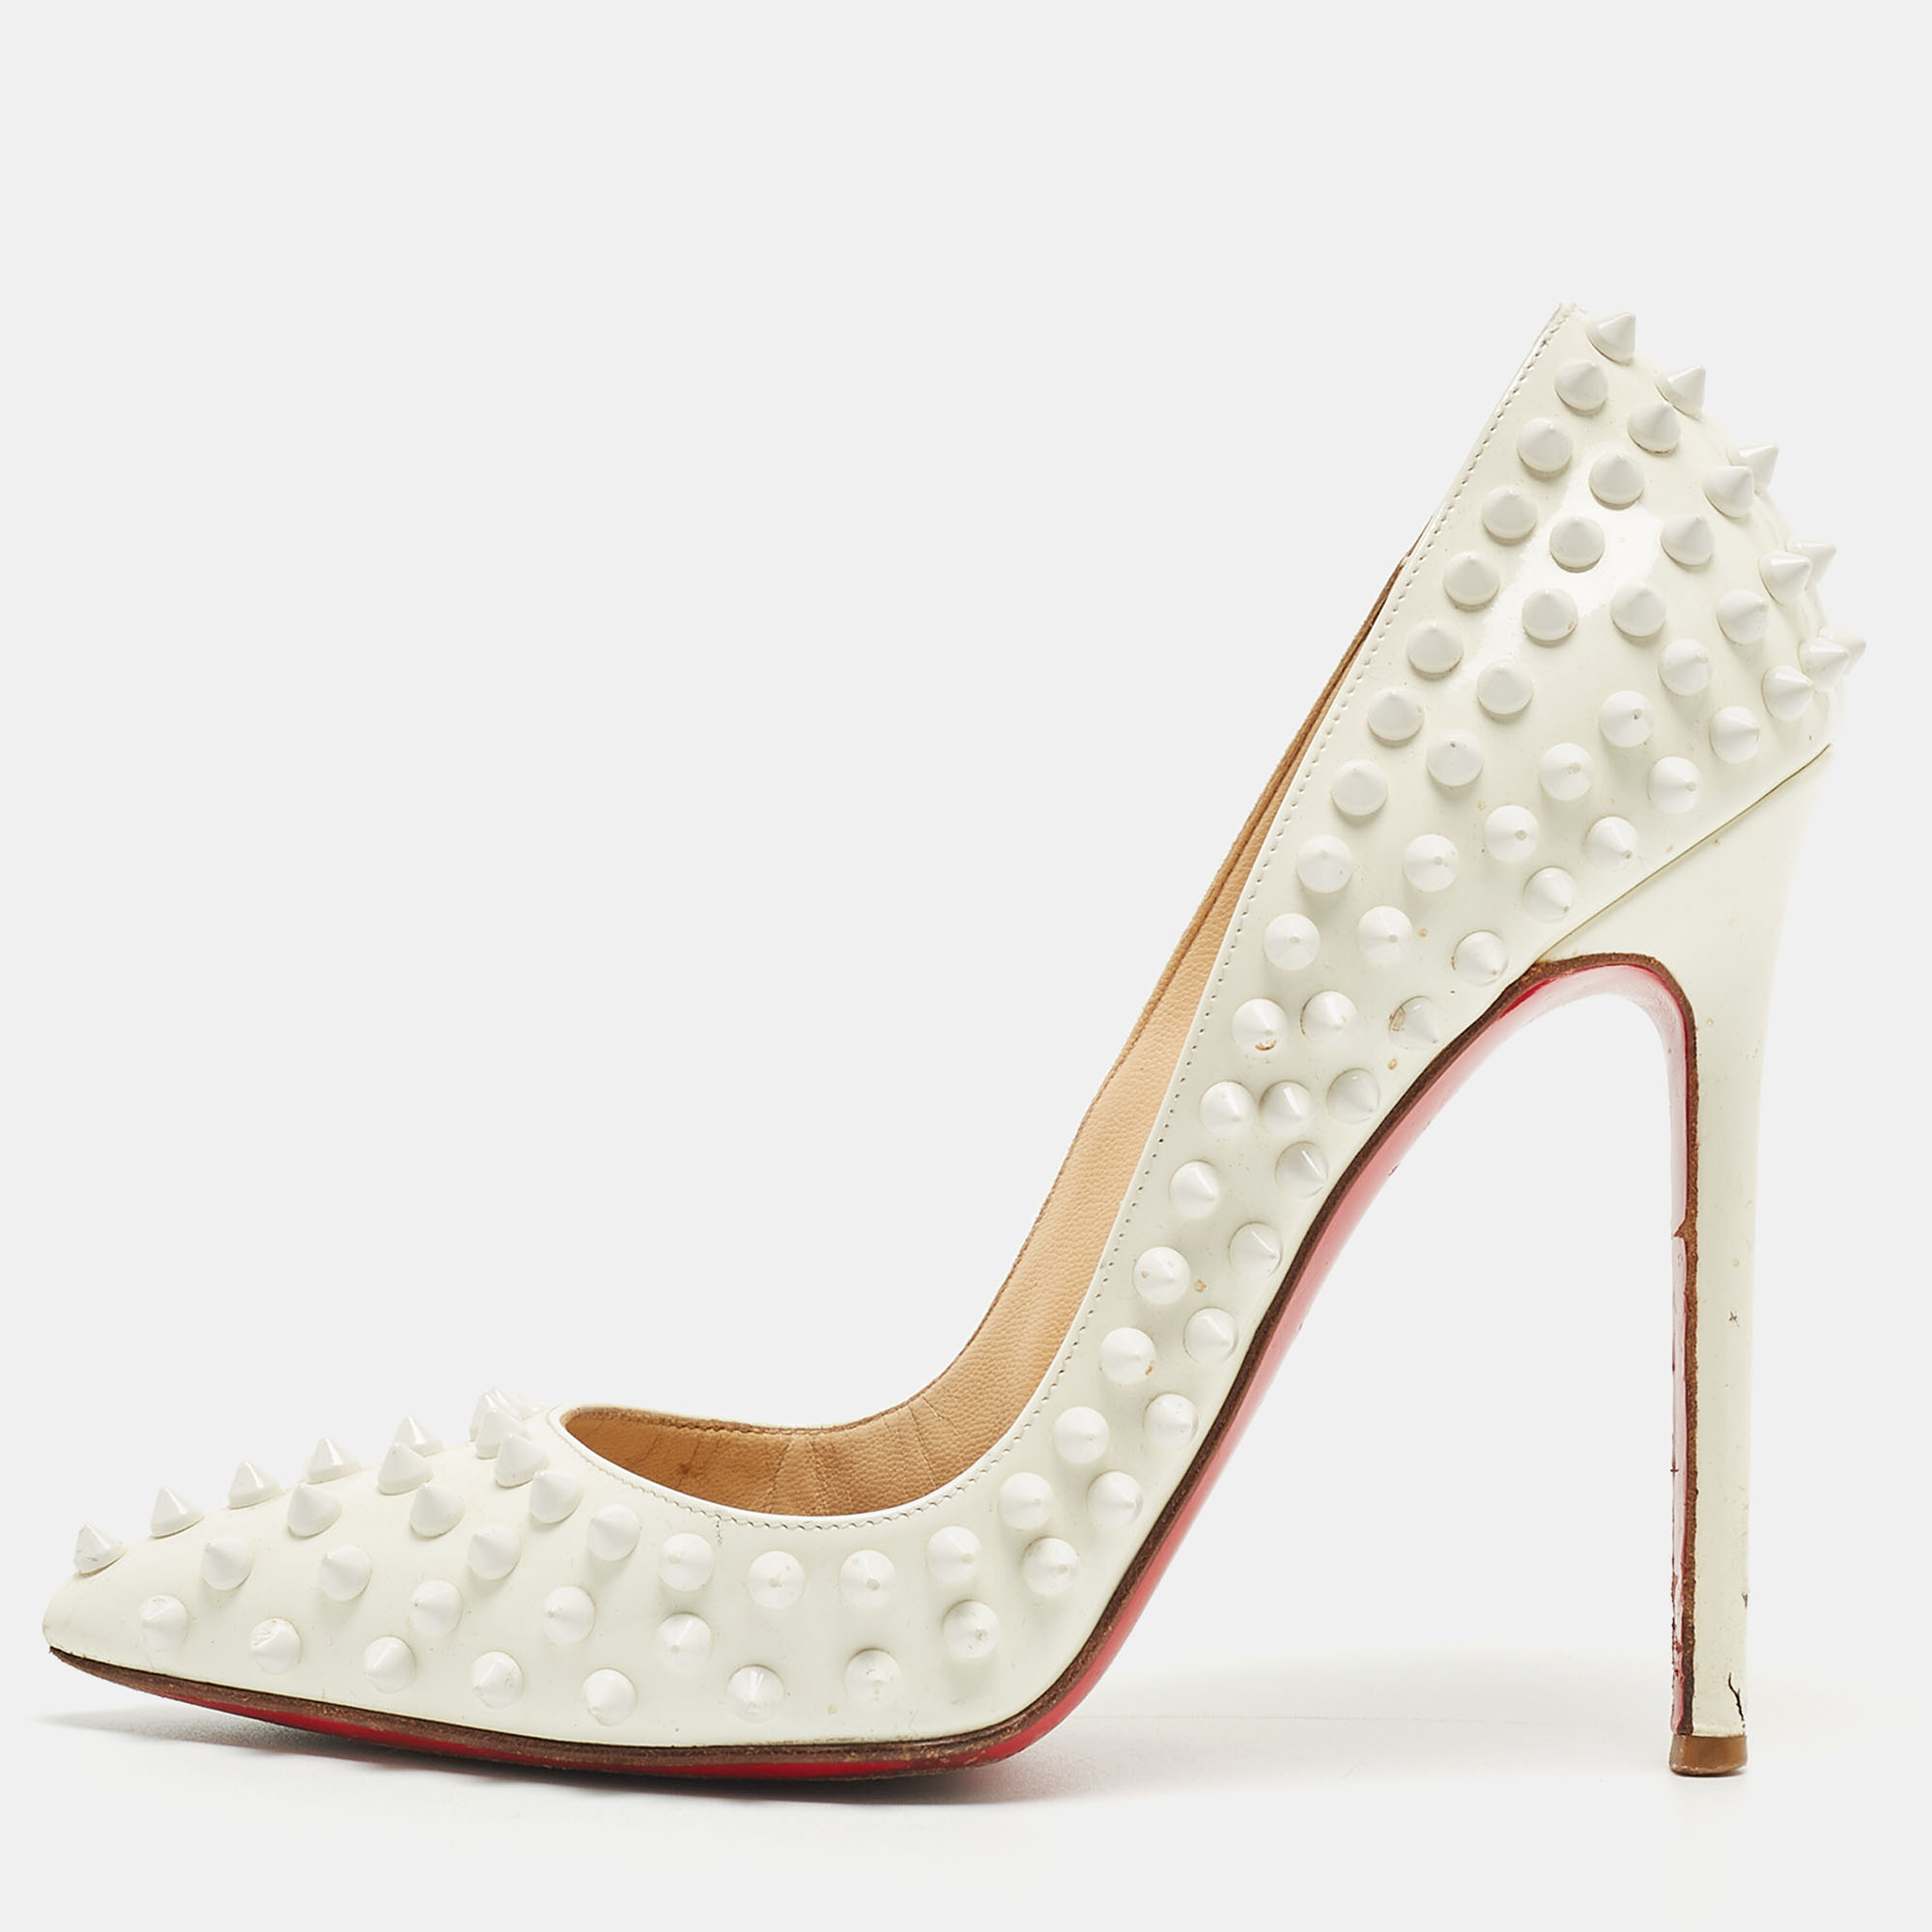 Pre-owned Christian Louboutin White Patent Leather Pigalle Spikes Pumps Size 37.5